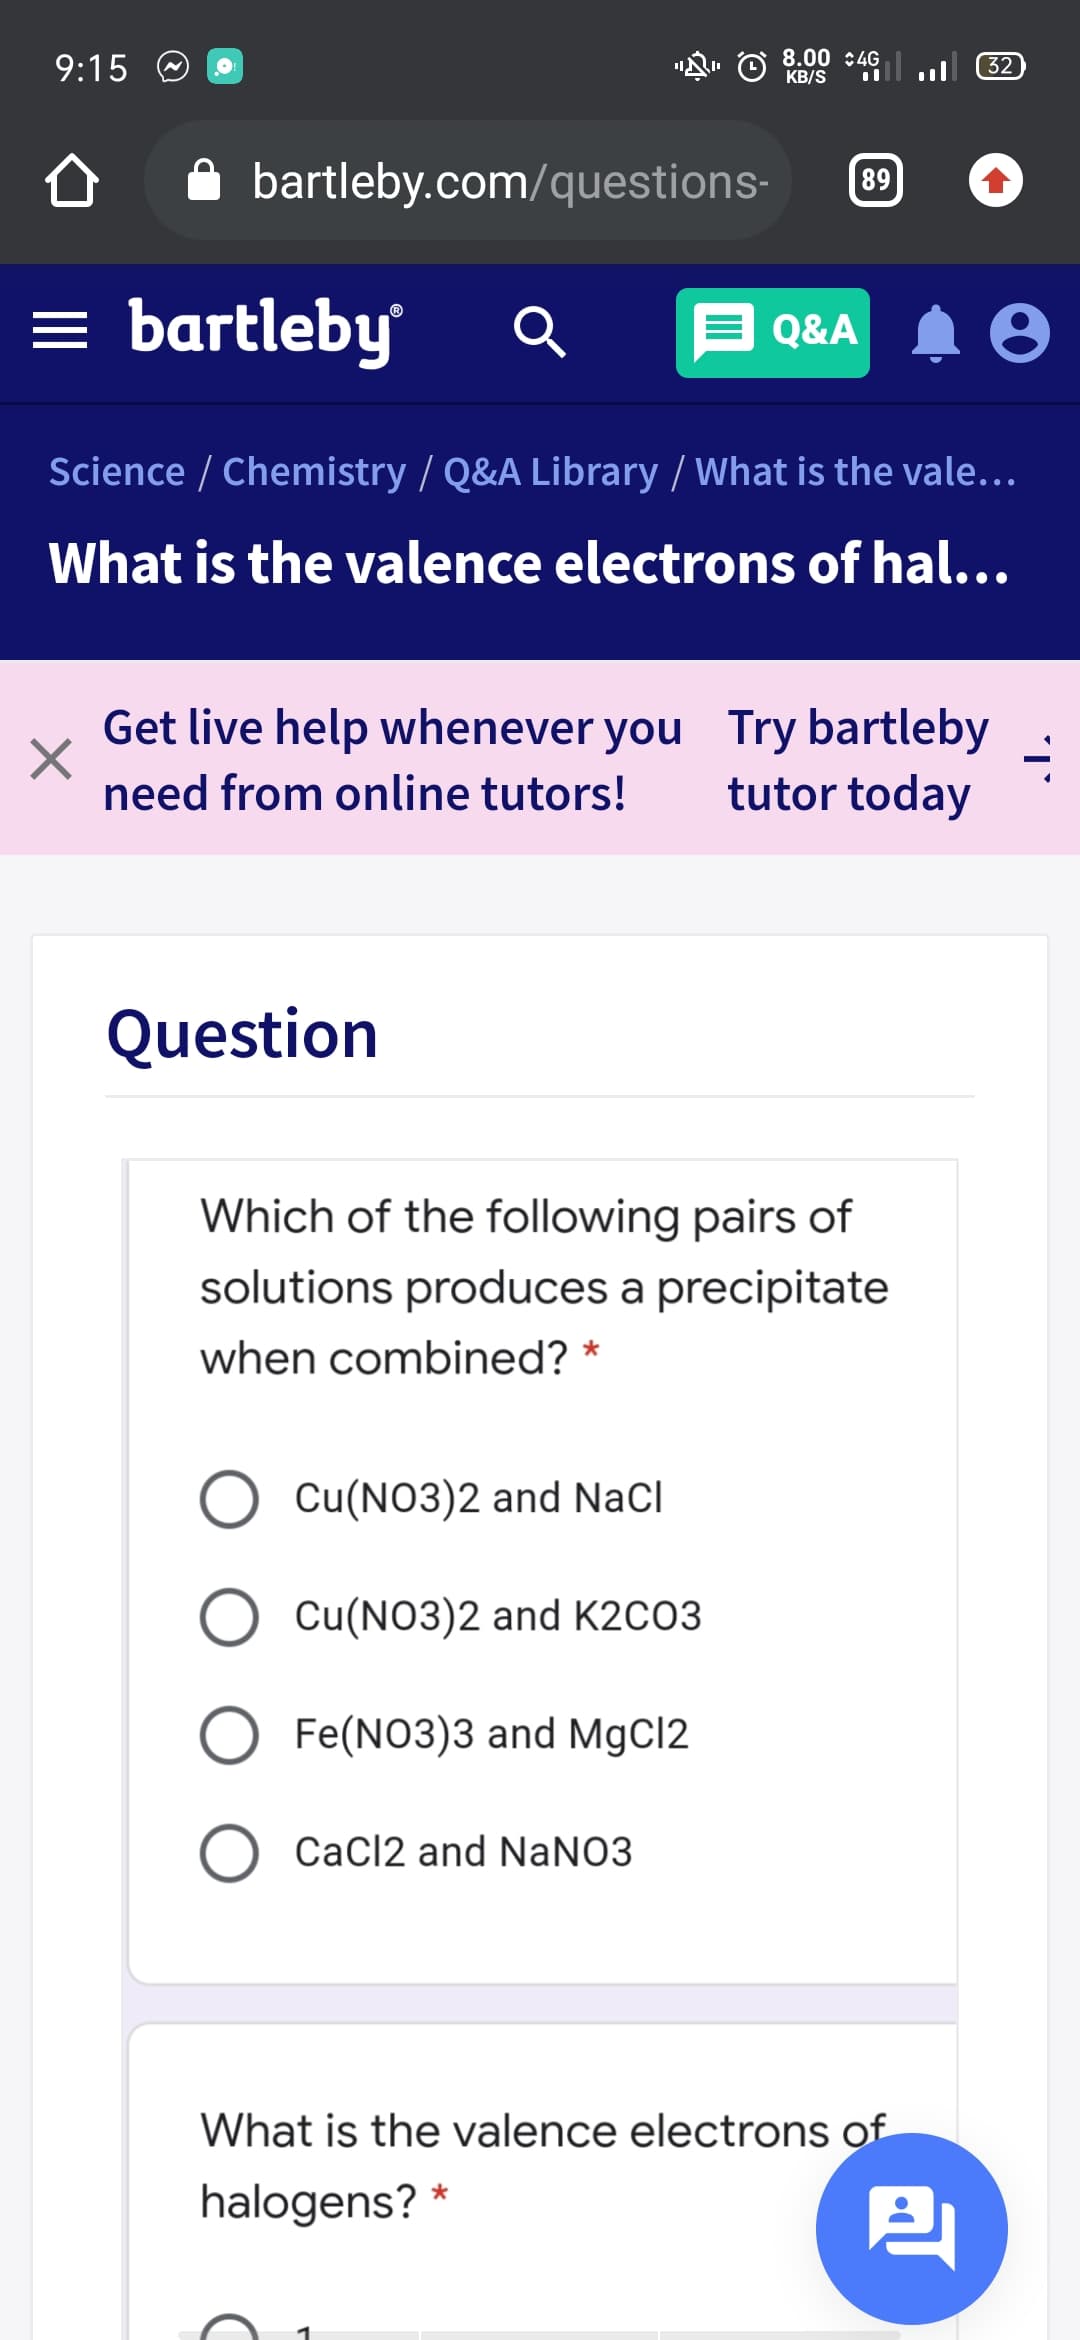 9:15 O O
8.00 :4G
KB/S
32
A bartleby.com/questions-
89
= bartleby
E Q&A
Science / Chemistry / Q&A Library / What is the vale...
What is the valence electrons of hal...
Get live help whenever you Try bartleby
tutor today
need from online tutors!
Question
Which of the following pairs of
solutions produces a precipitate
when combined? *
Cu(NO3)2 and NaCl
Cu(NO3)2 and K2CO3
Fe(NO3)3 and MgCl2
O CaCl2 and NaNO3
What is the valence electrons of
halogens? *
